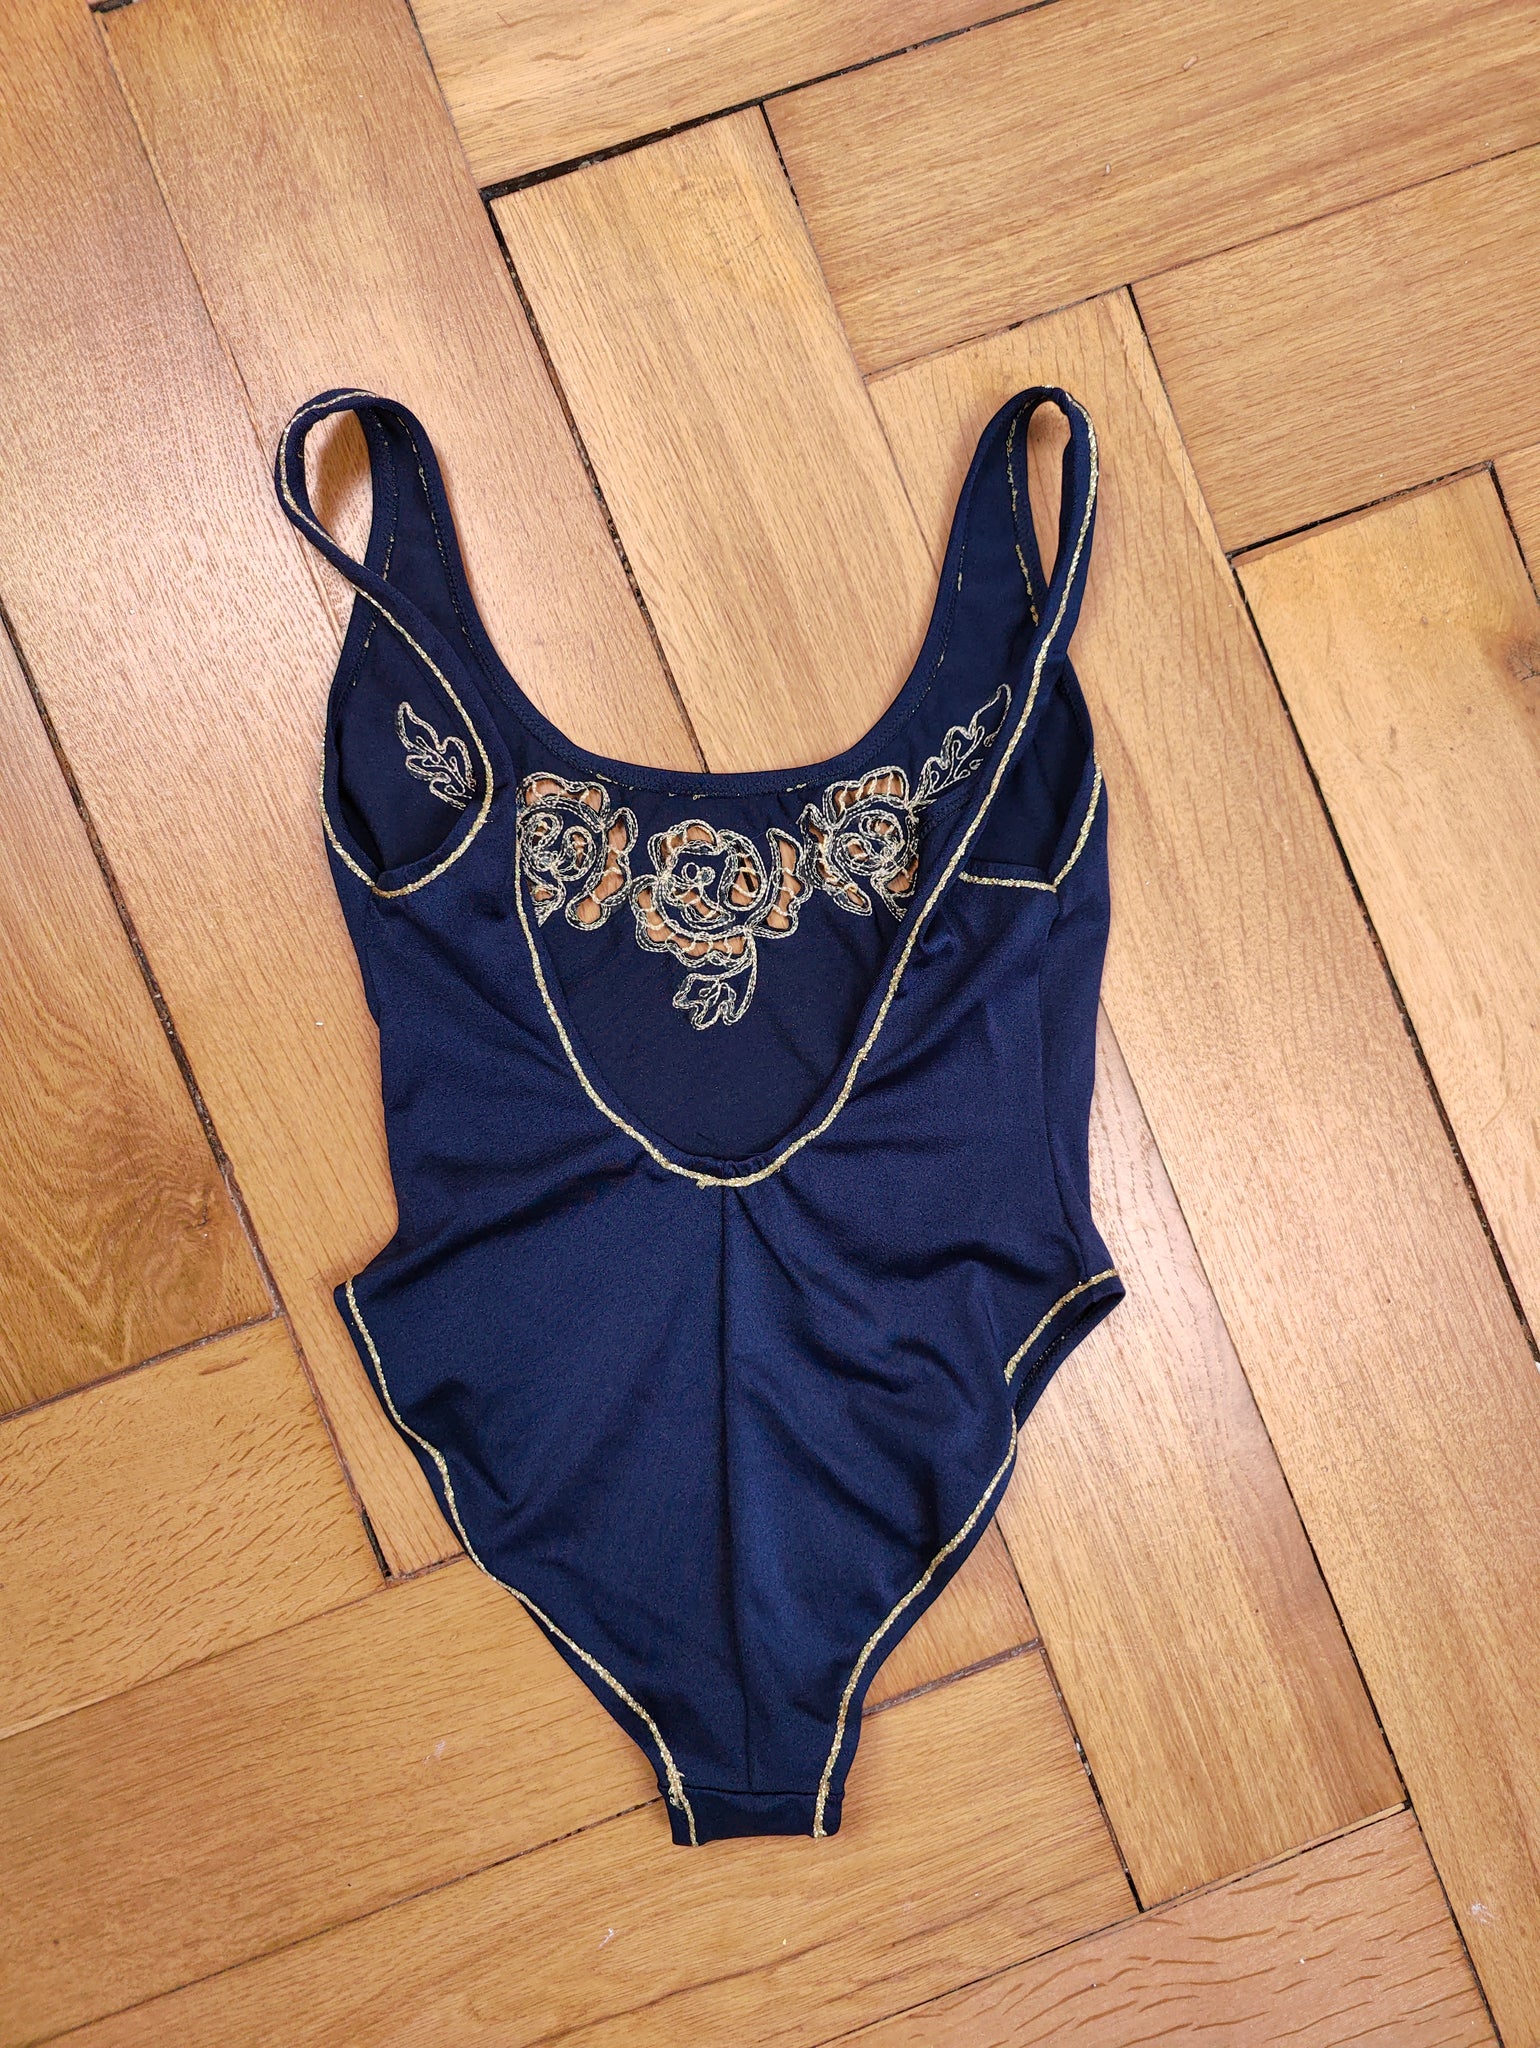 SALE Cool Vintage Navy Blue & Gold Nautical One Piece Swimsuit 